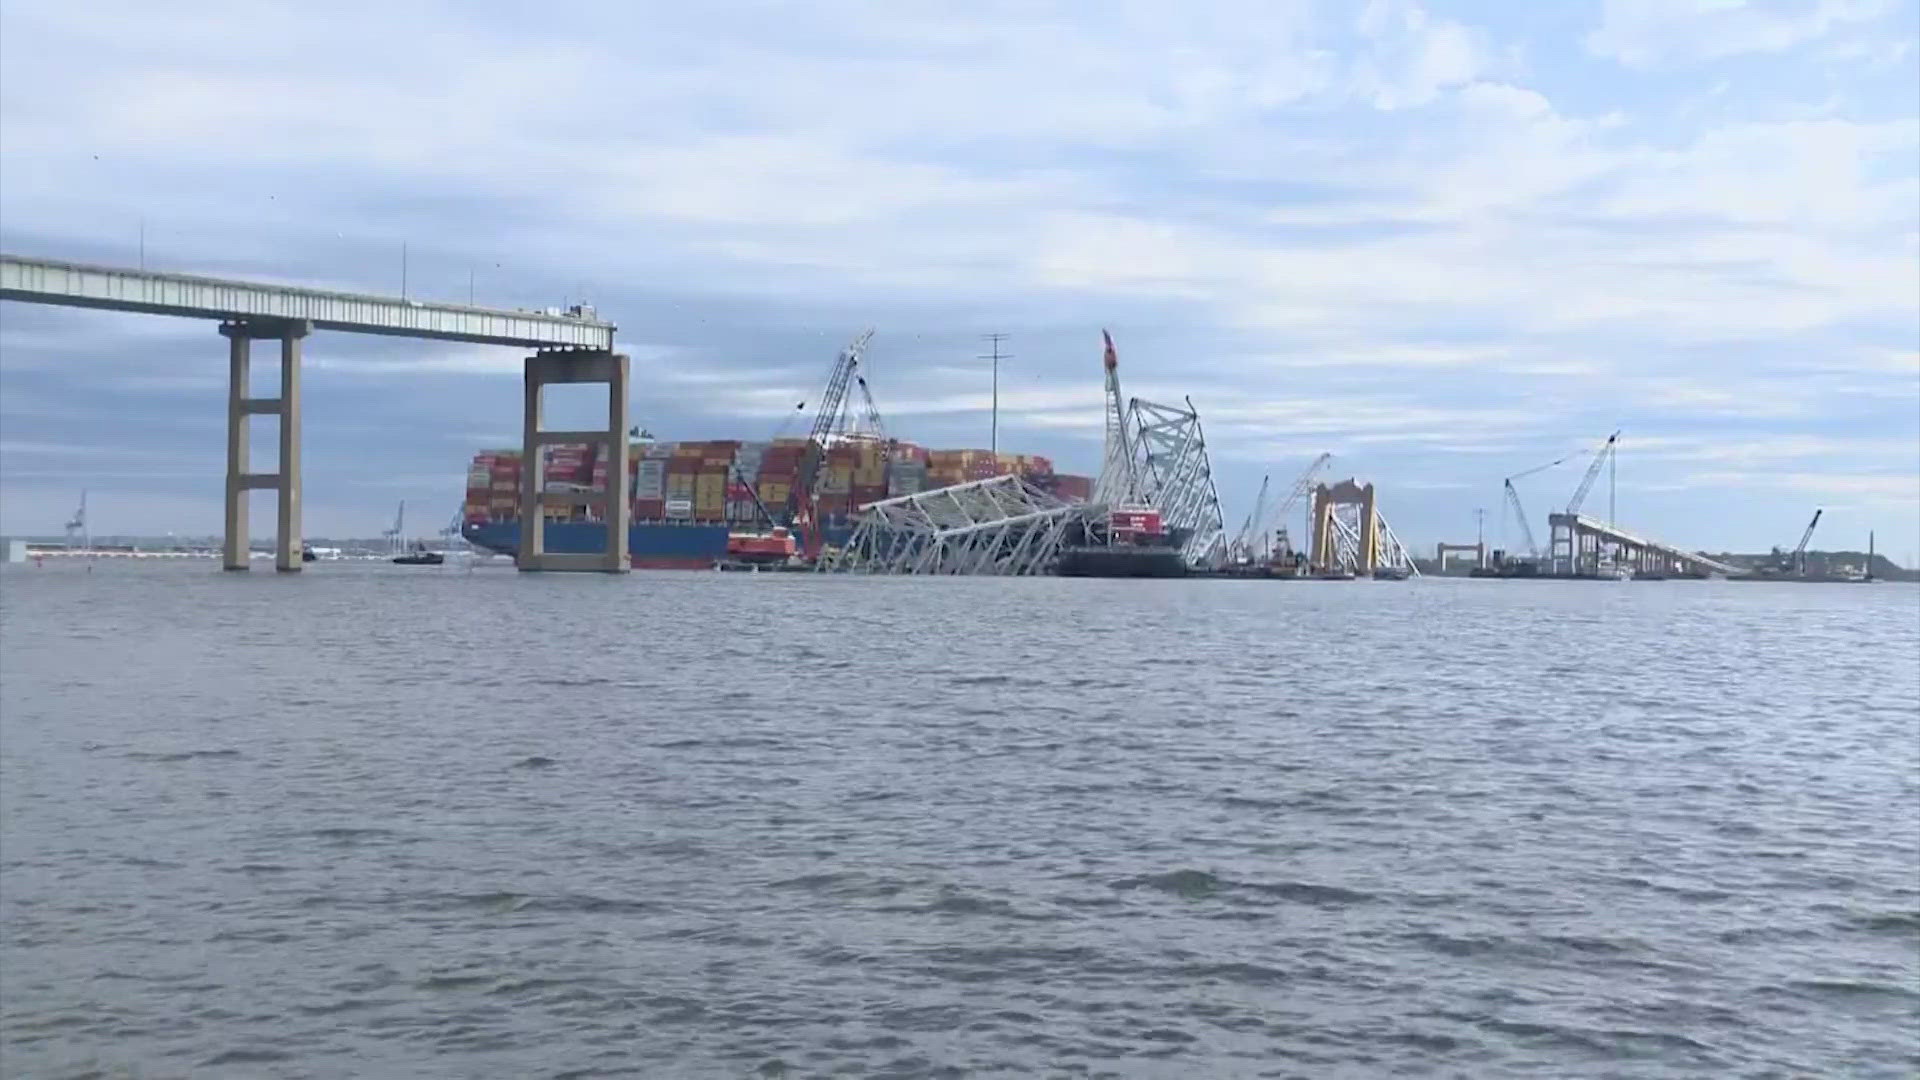 The National Transportation Safety Board released its findings from a preliminary investigation into the Baltimore bridge collapse in March.